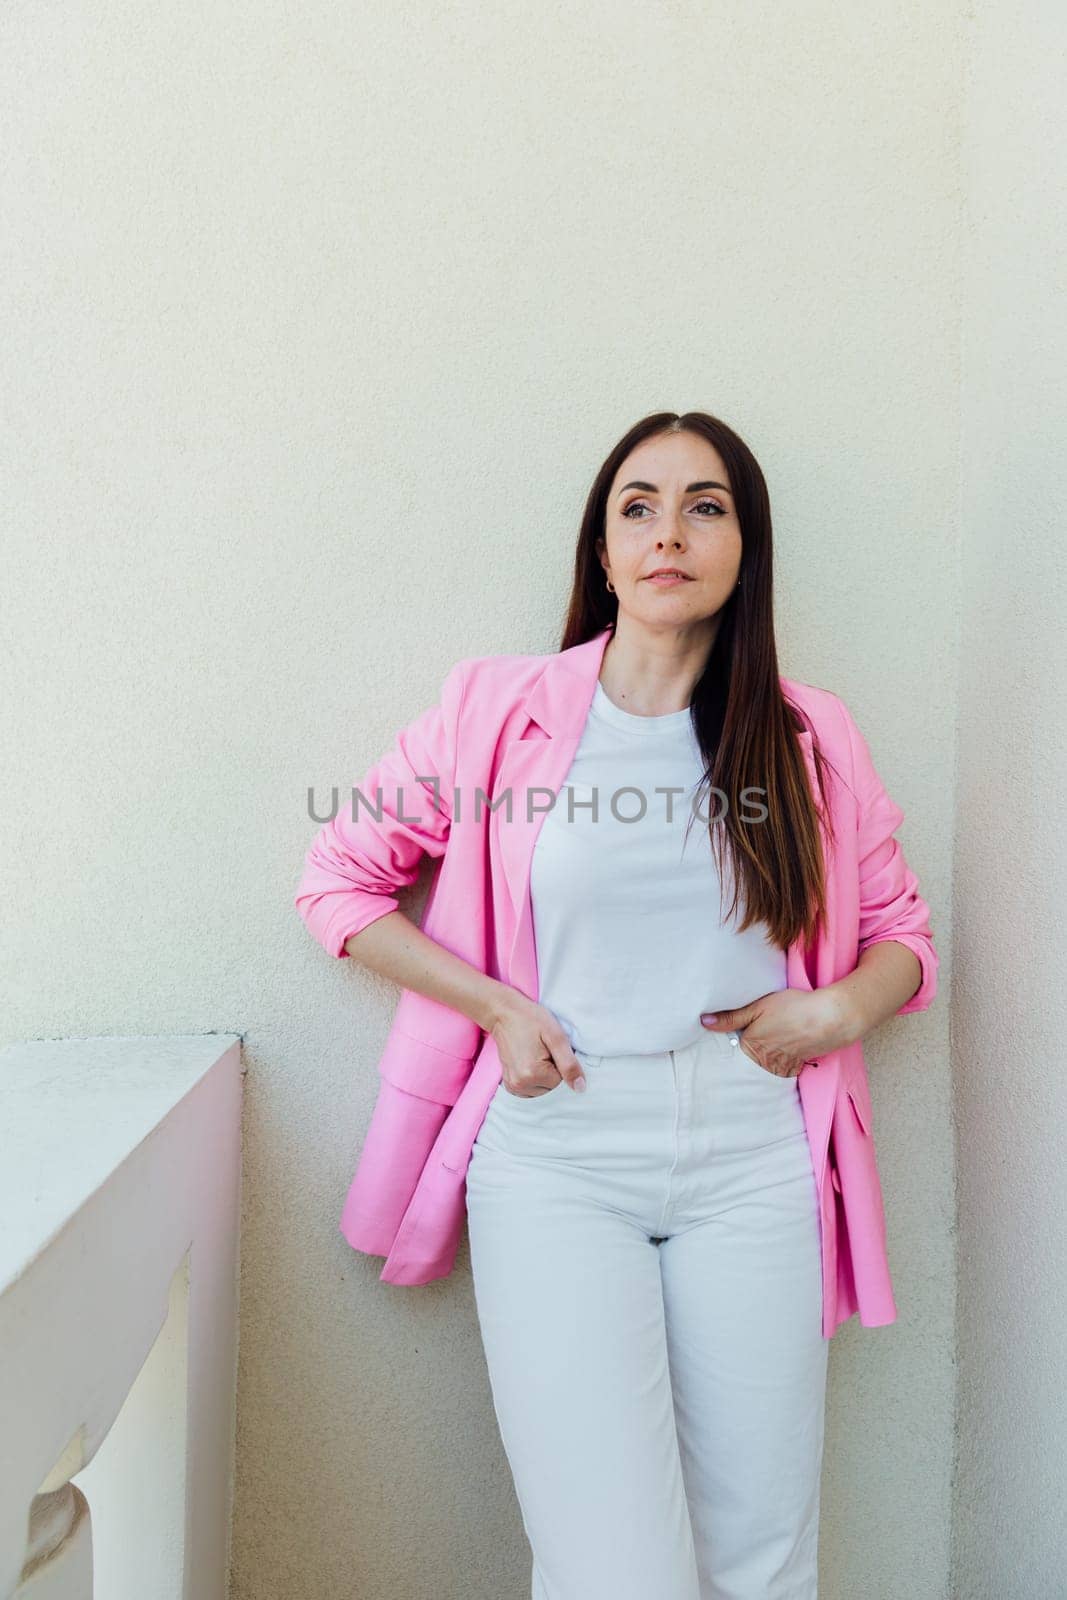 Portrait of a beautiful woman in white clothes and pink jacket